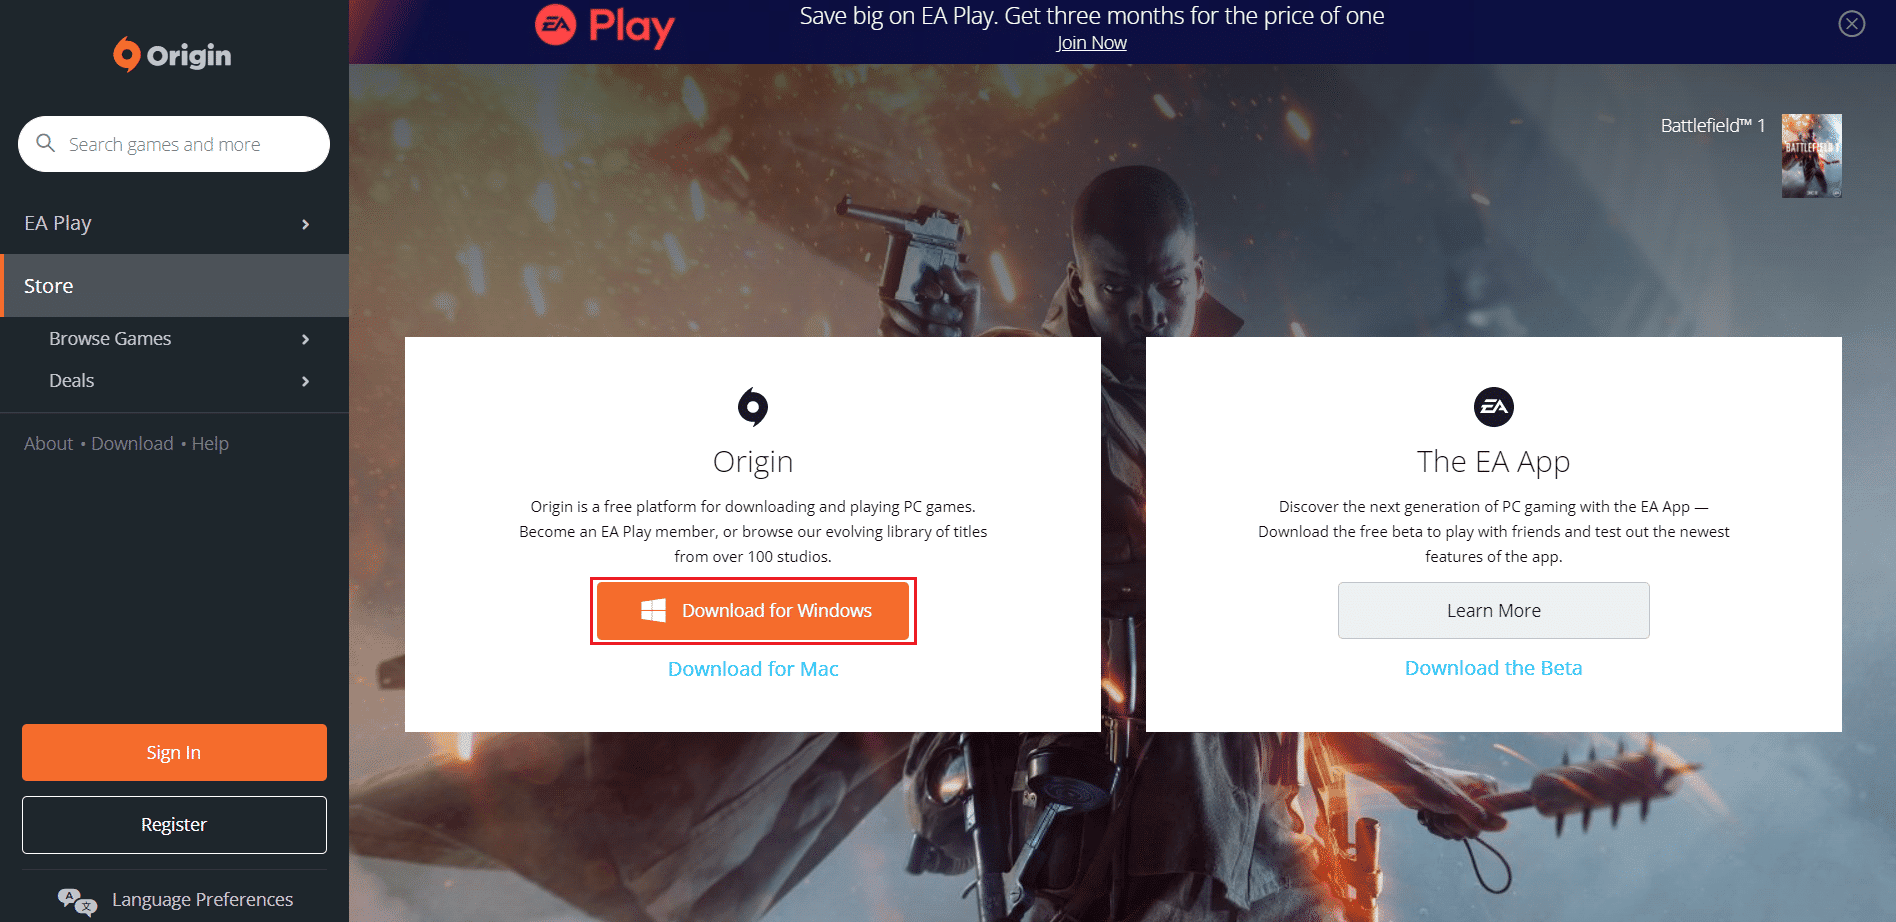 Download Origin from its official website by clicking on Download for Windows button